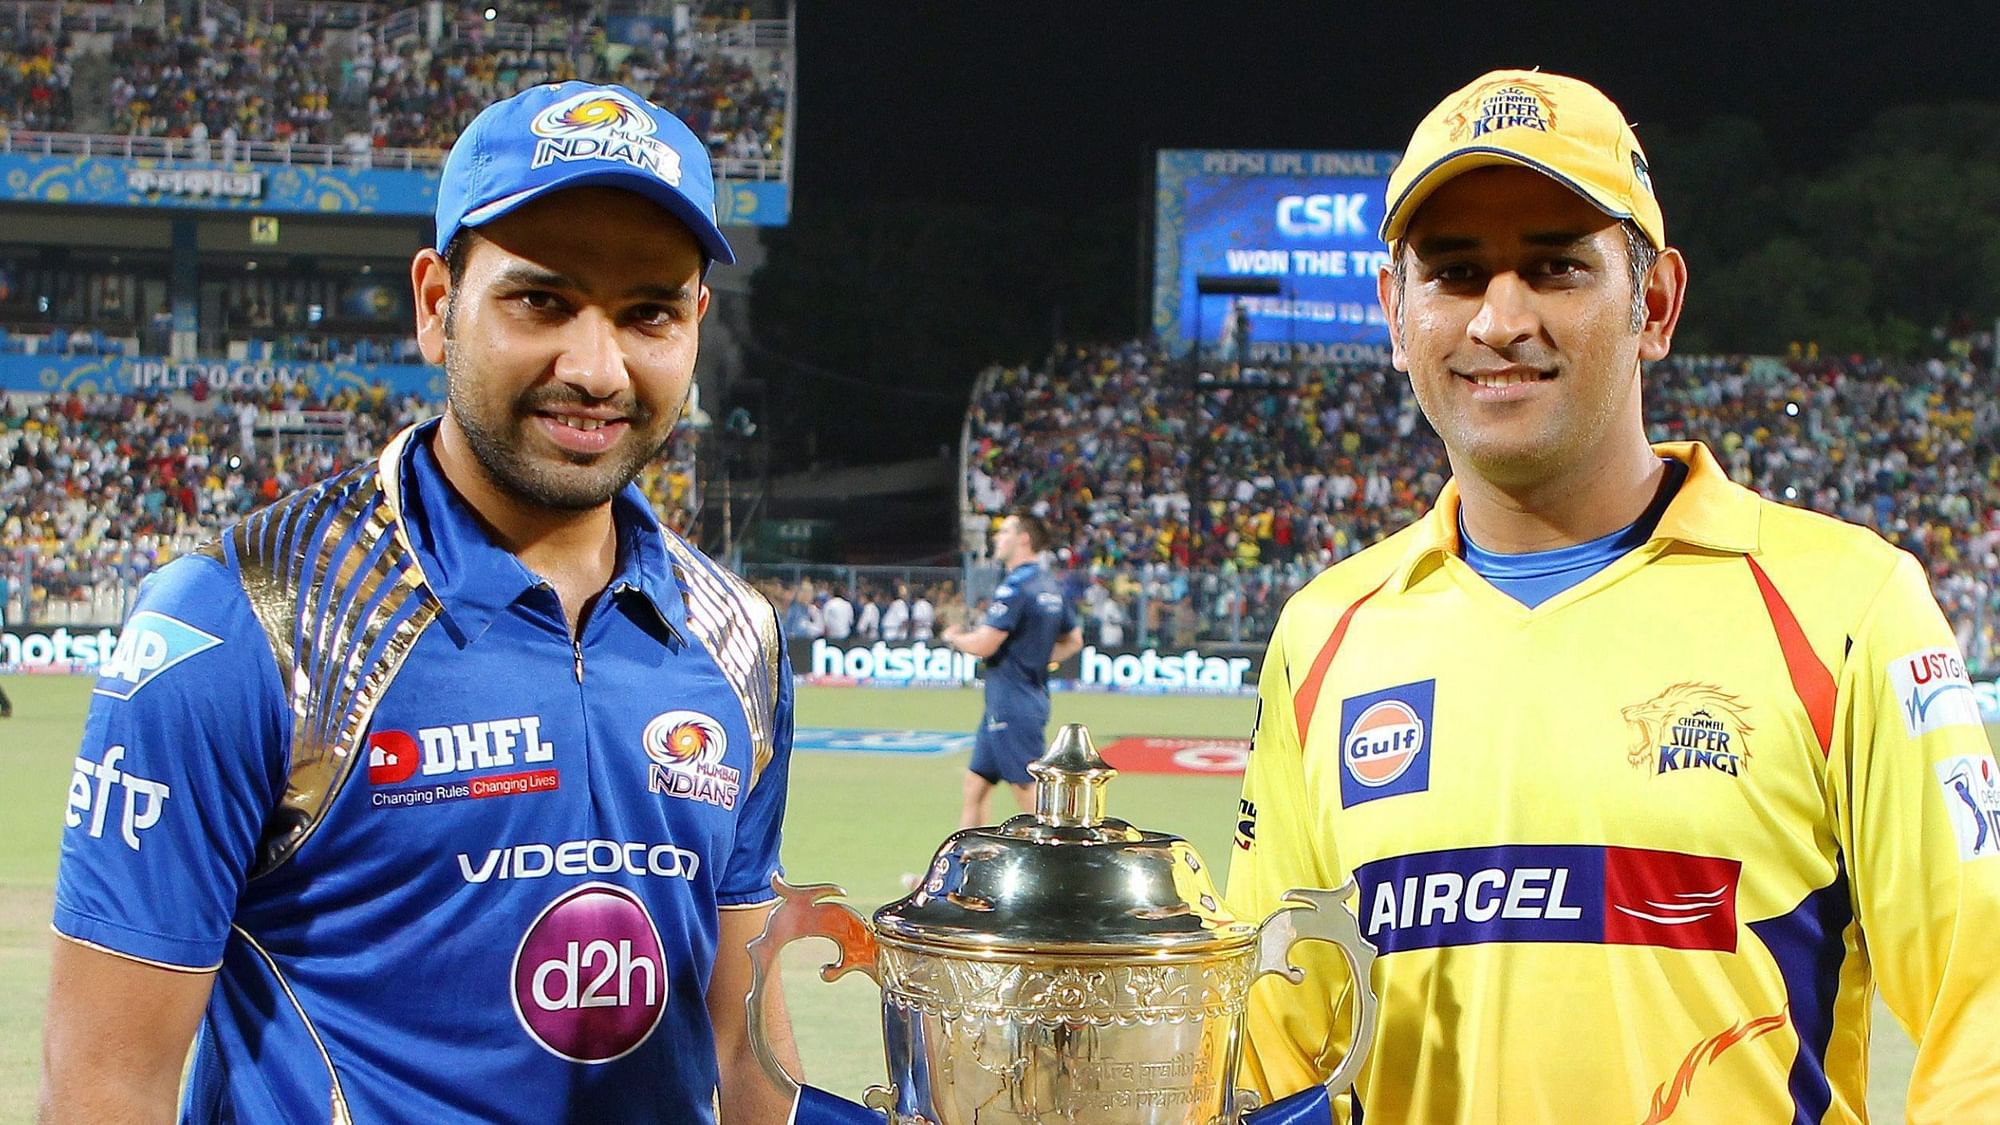 BCCI had postponed the start of IPL 2020 to 15 April from 29 March amidst the COVID-19 outbreak in the country.